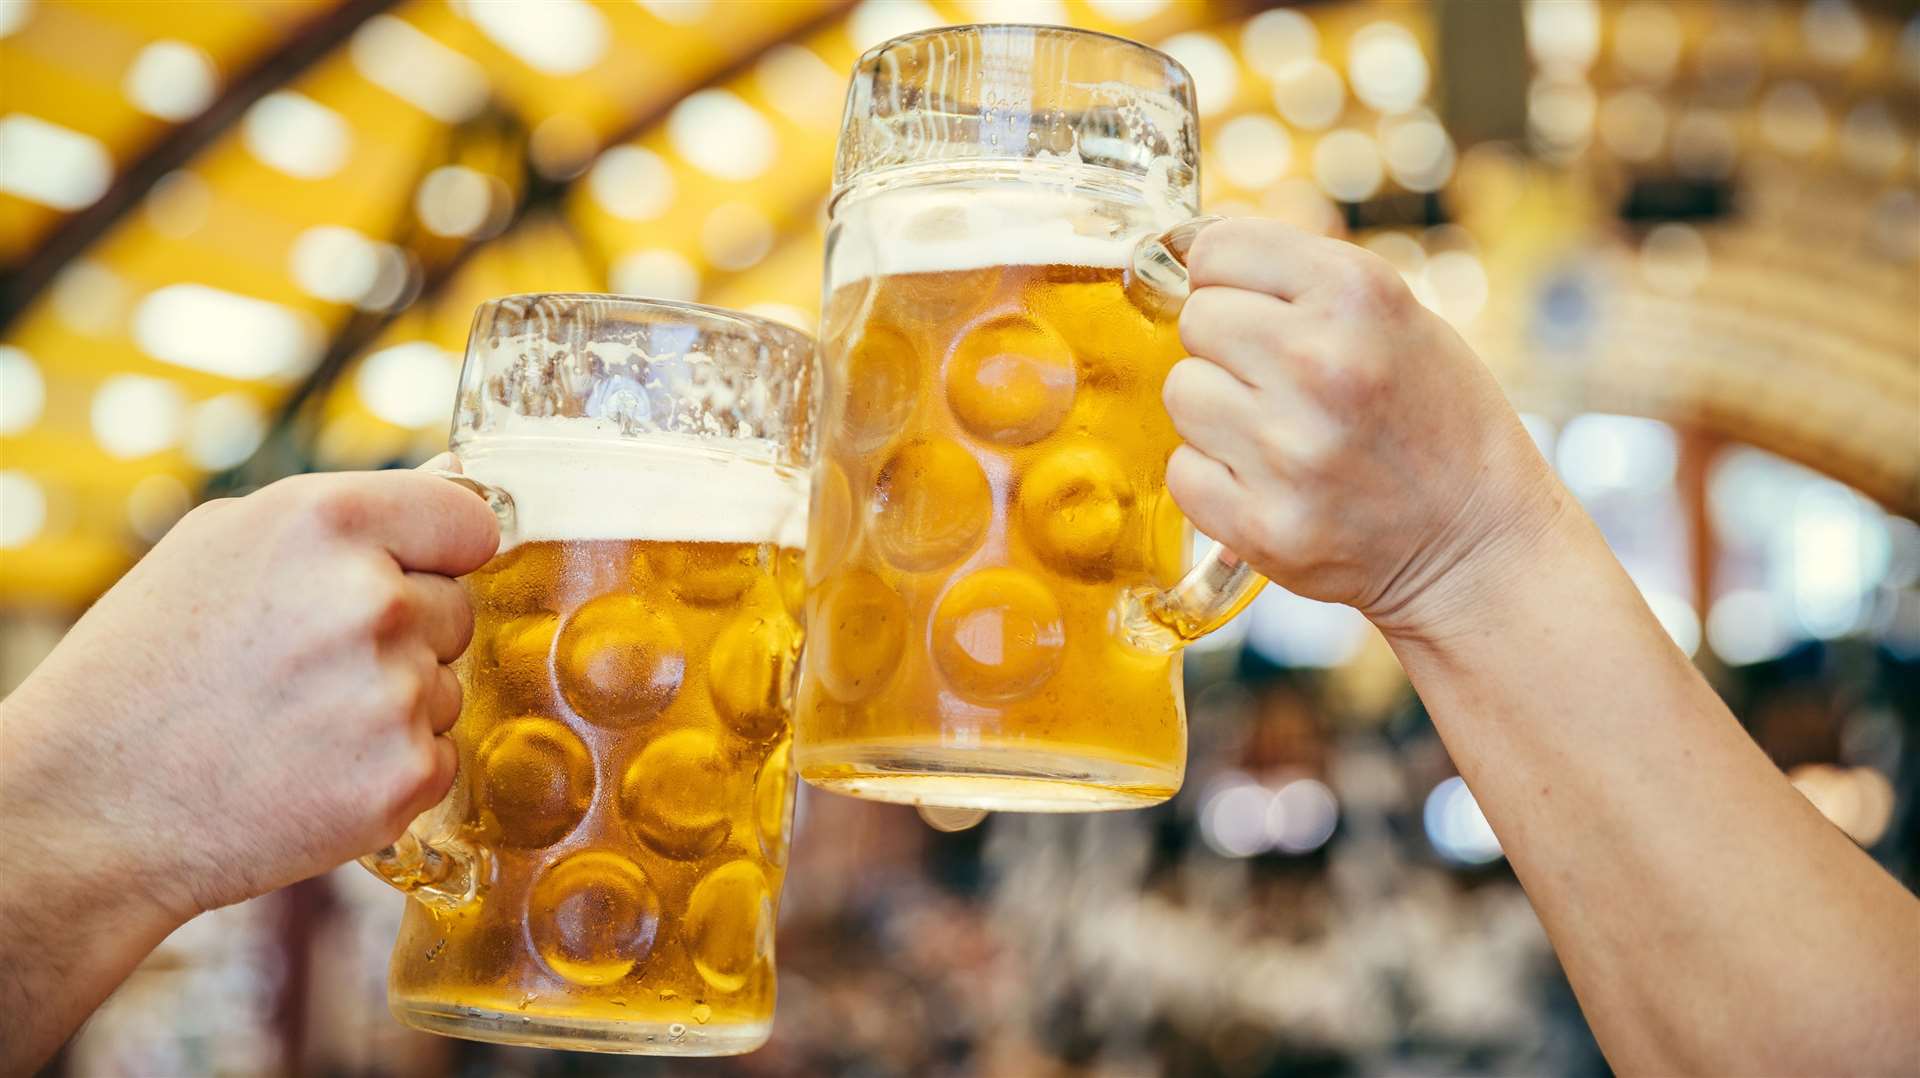 The official Oktoberfest in Germany runs from September 16 to October 3. Picture: iStock